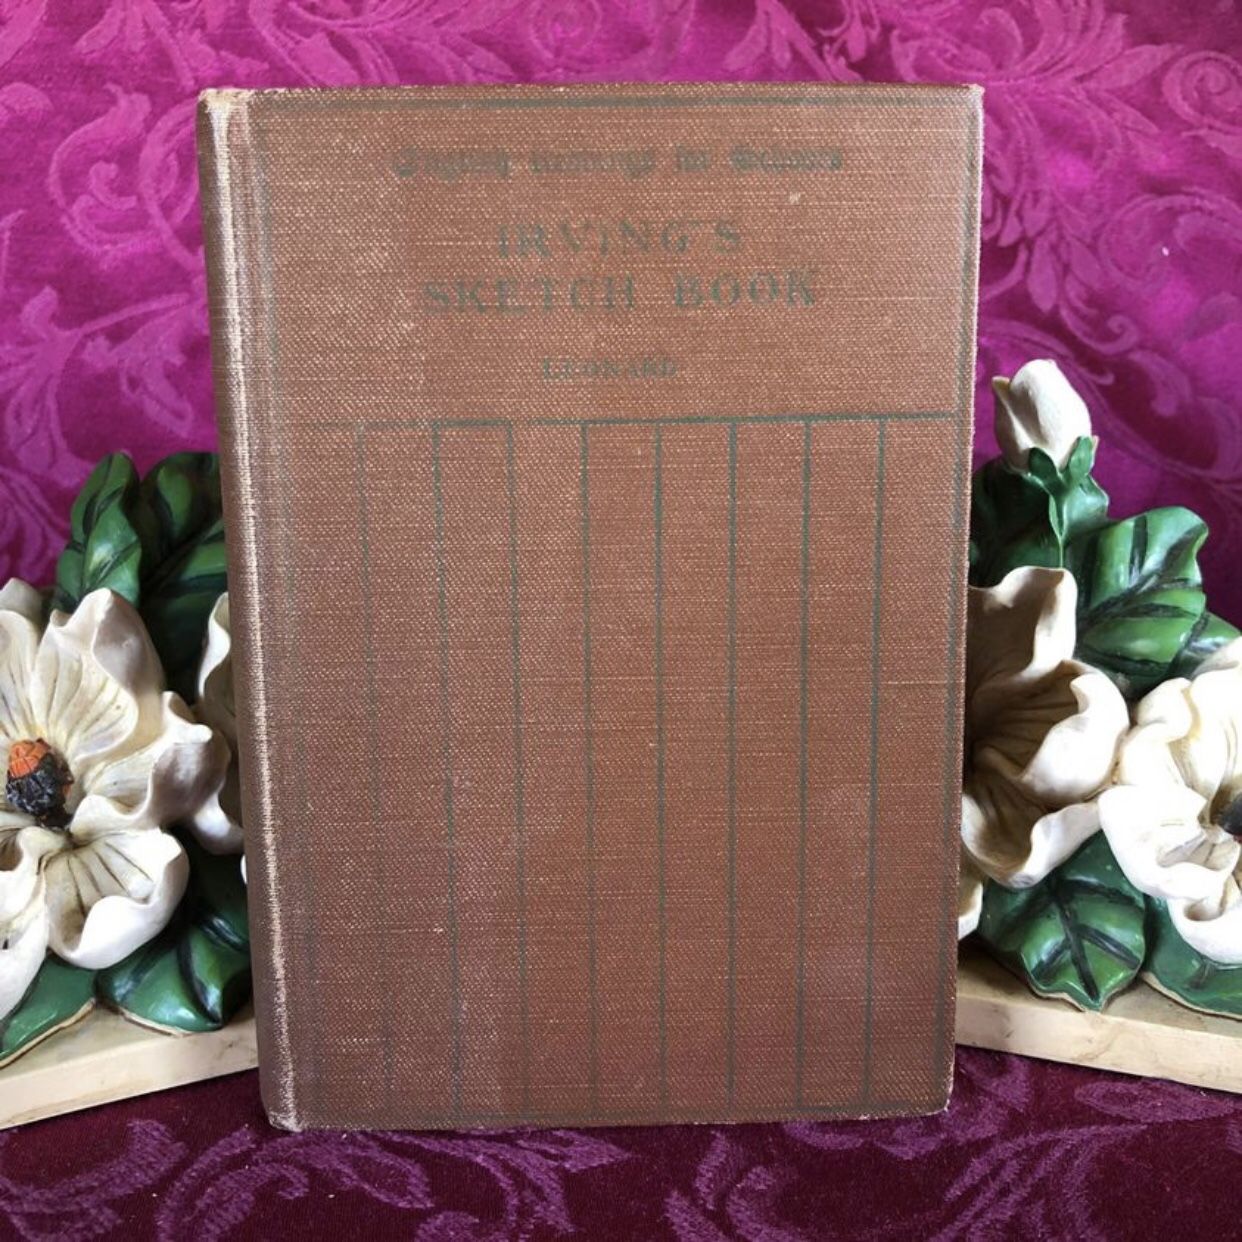 1911 Antique Book: Irving's Sketch Book. Published by Henry Holt and Company. English Readings for  Schools  This antique book is in overall good cond